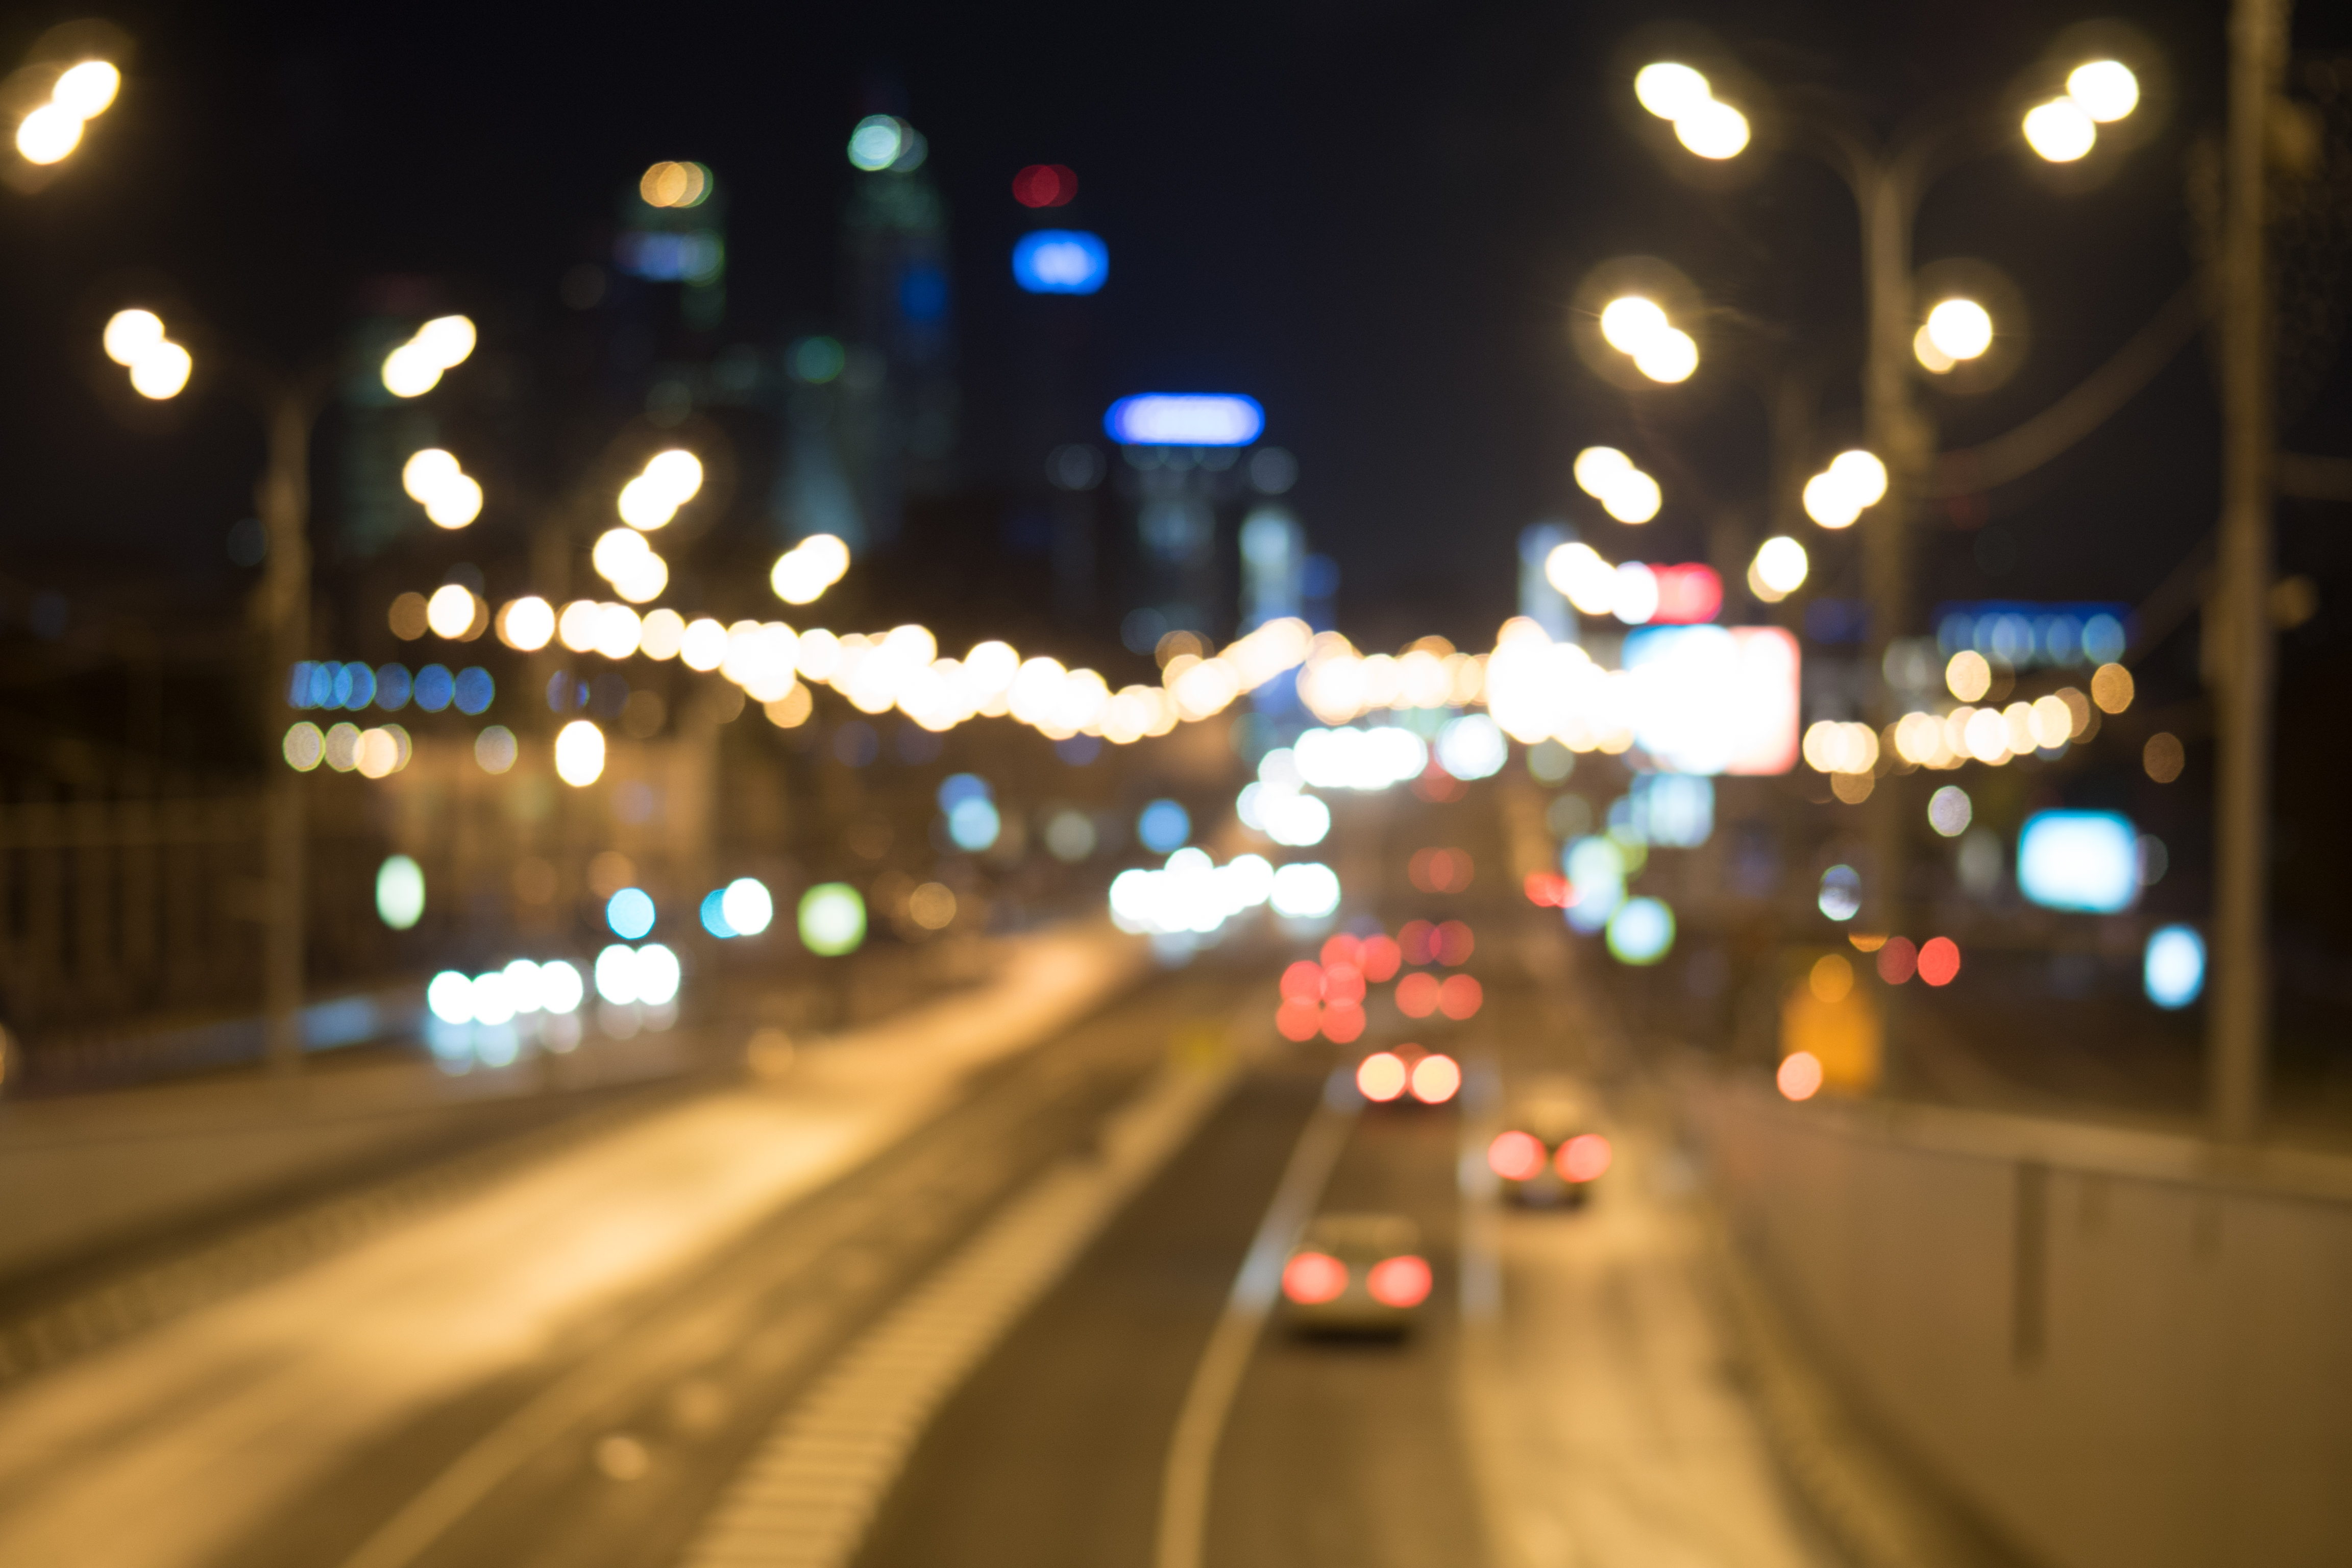 blurred image of city at night